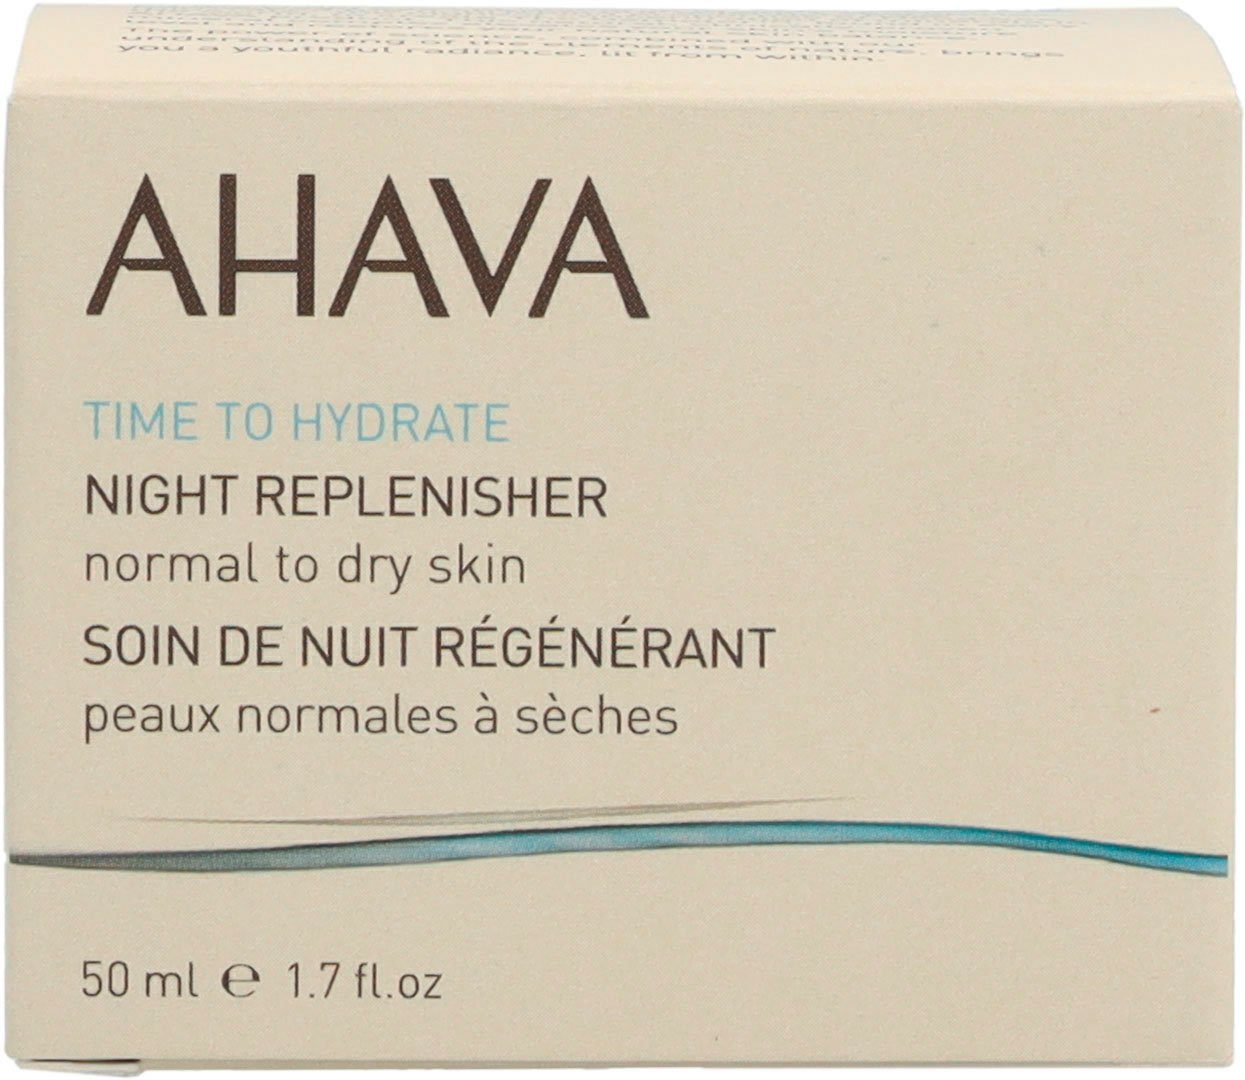 To AHAVA Nachtcreme Dry Hydrate Night Replenisher Normal Time